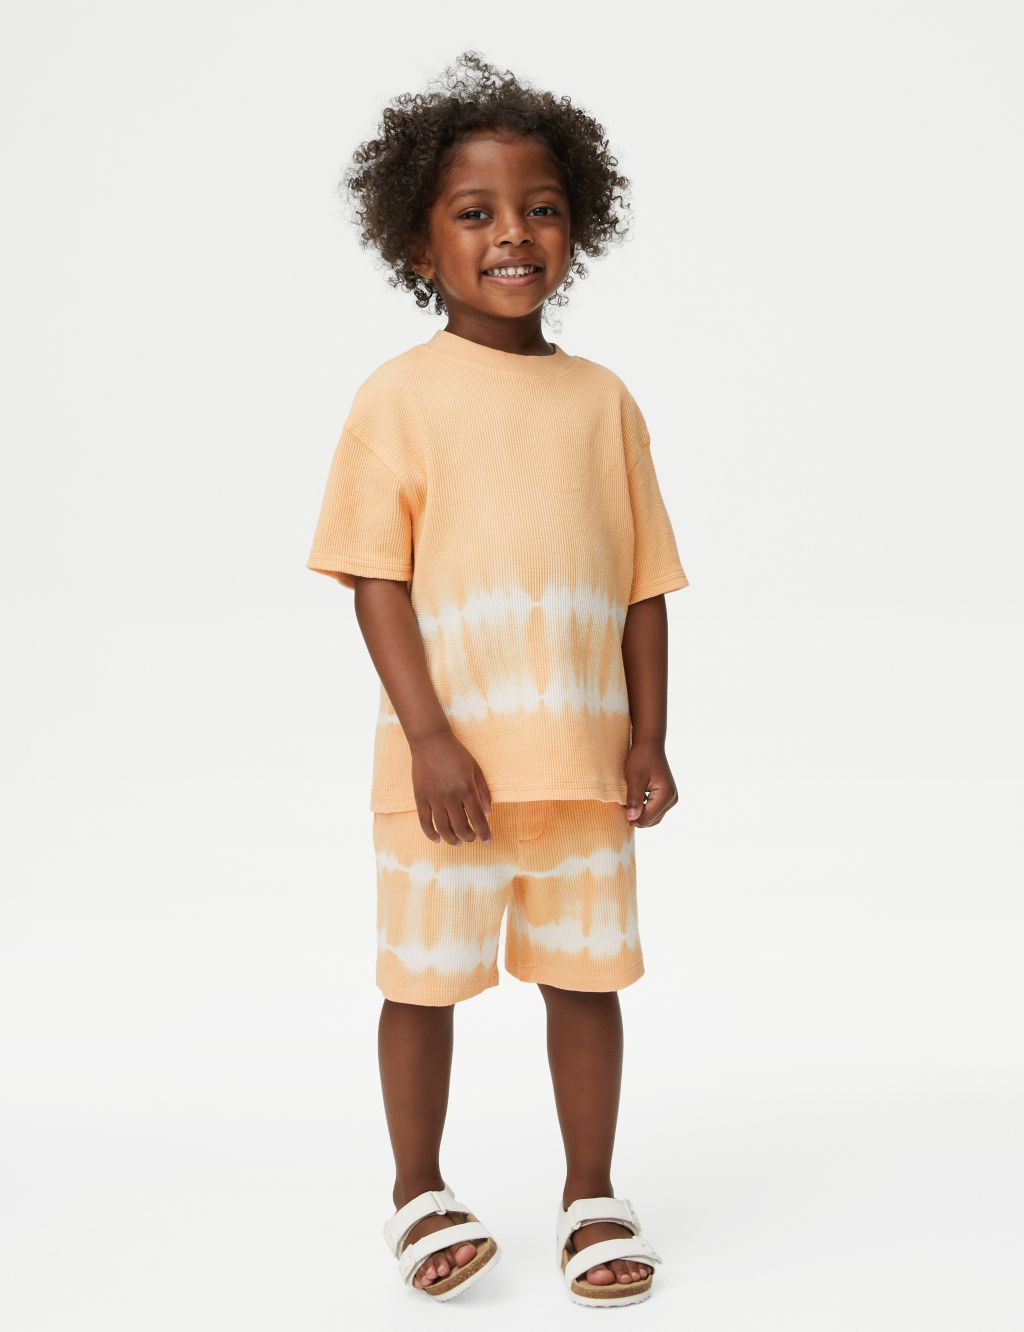 Pure Cotton Top & Bottom Outfit (2-8 Yrs) 2 of 4